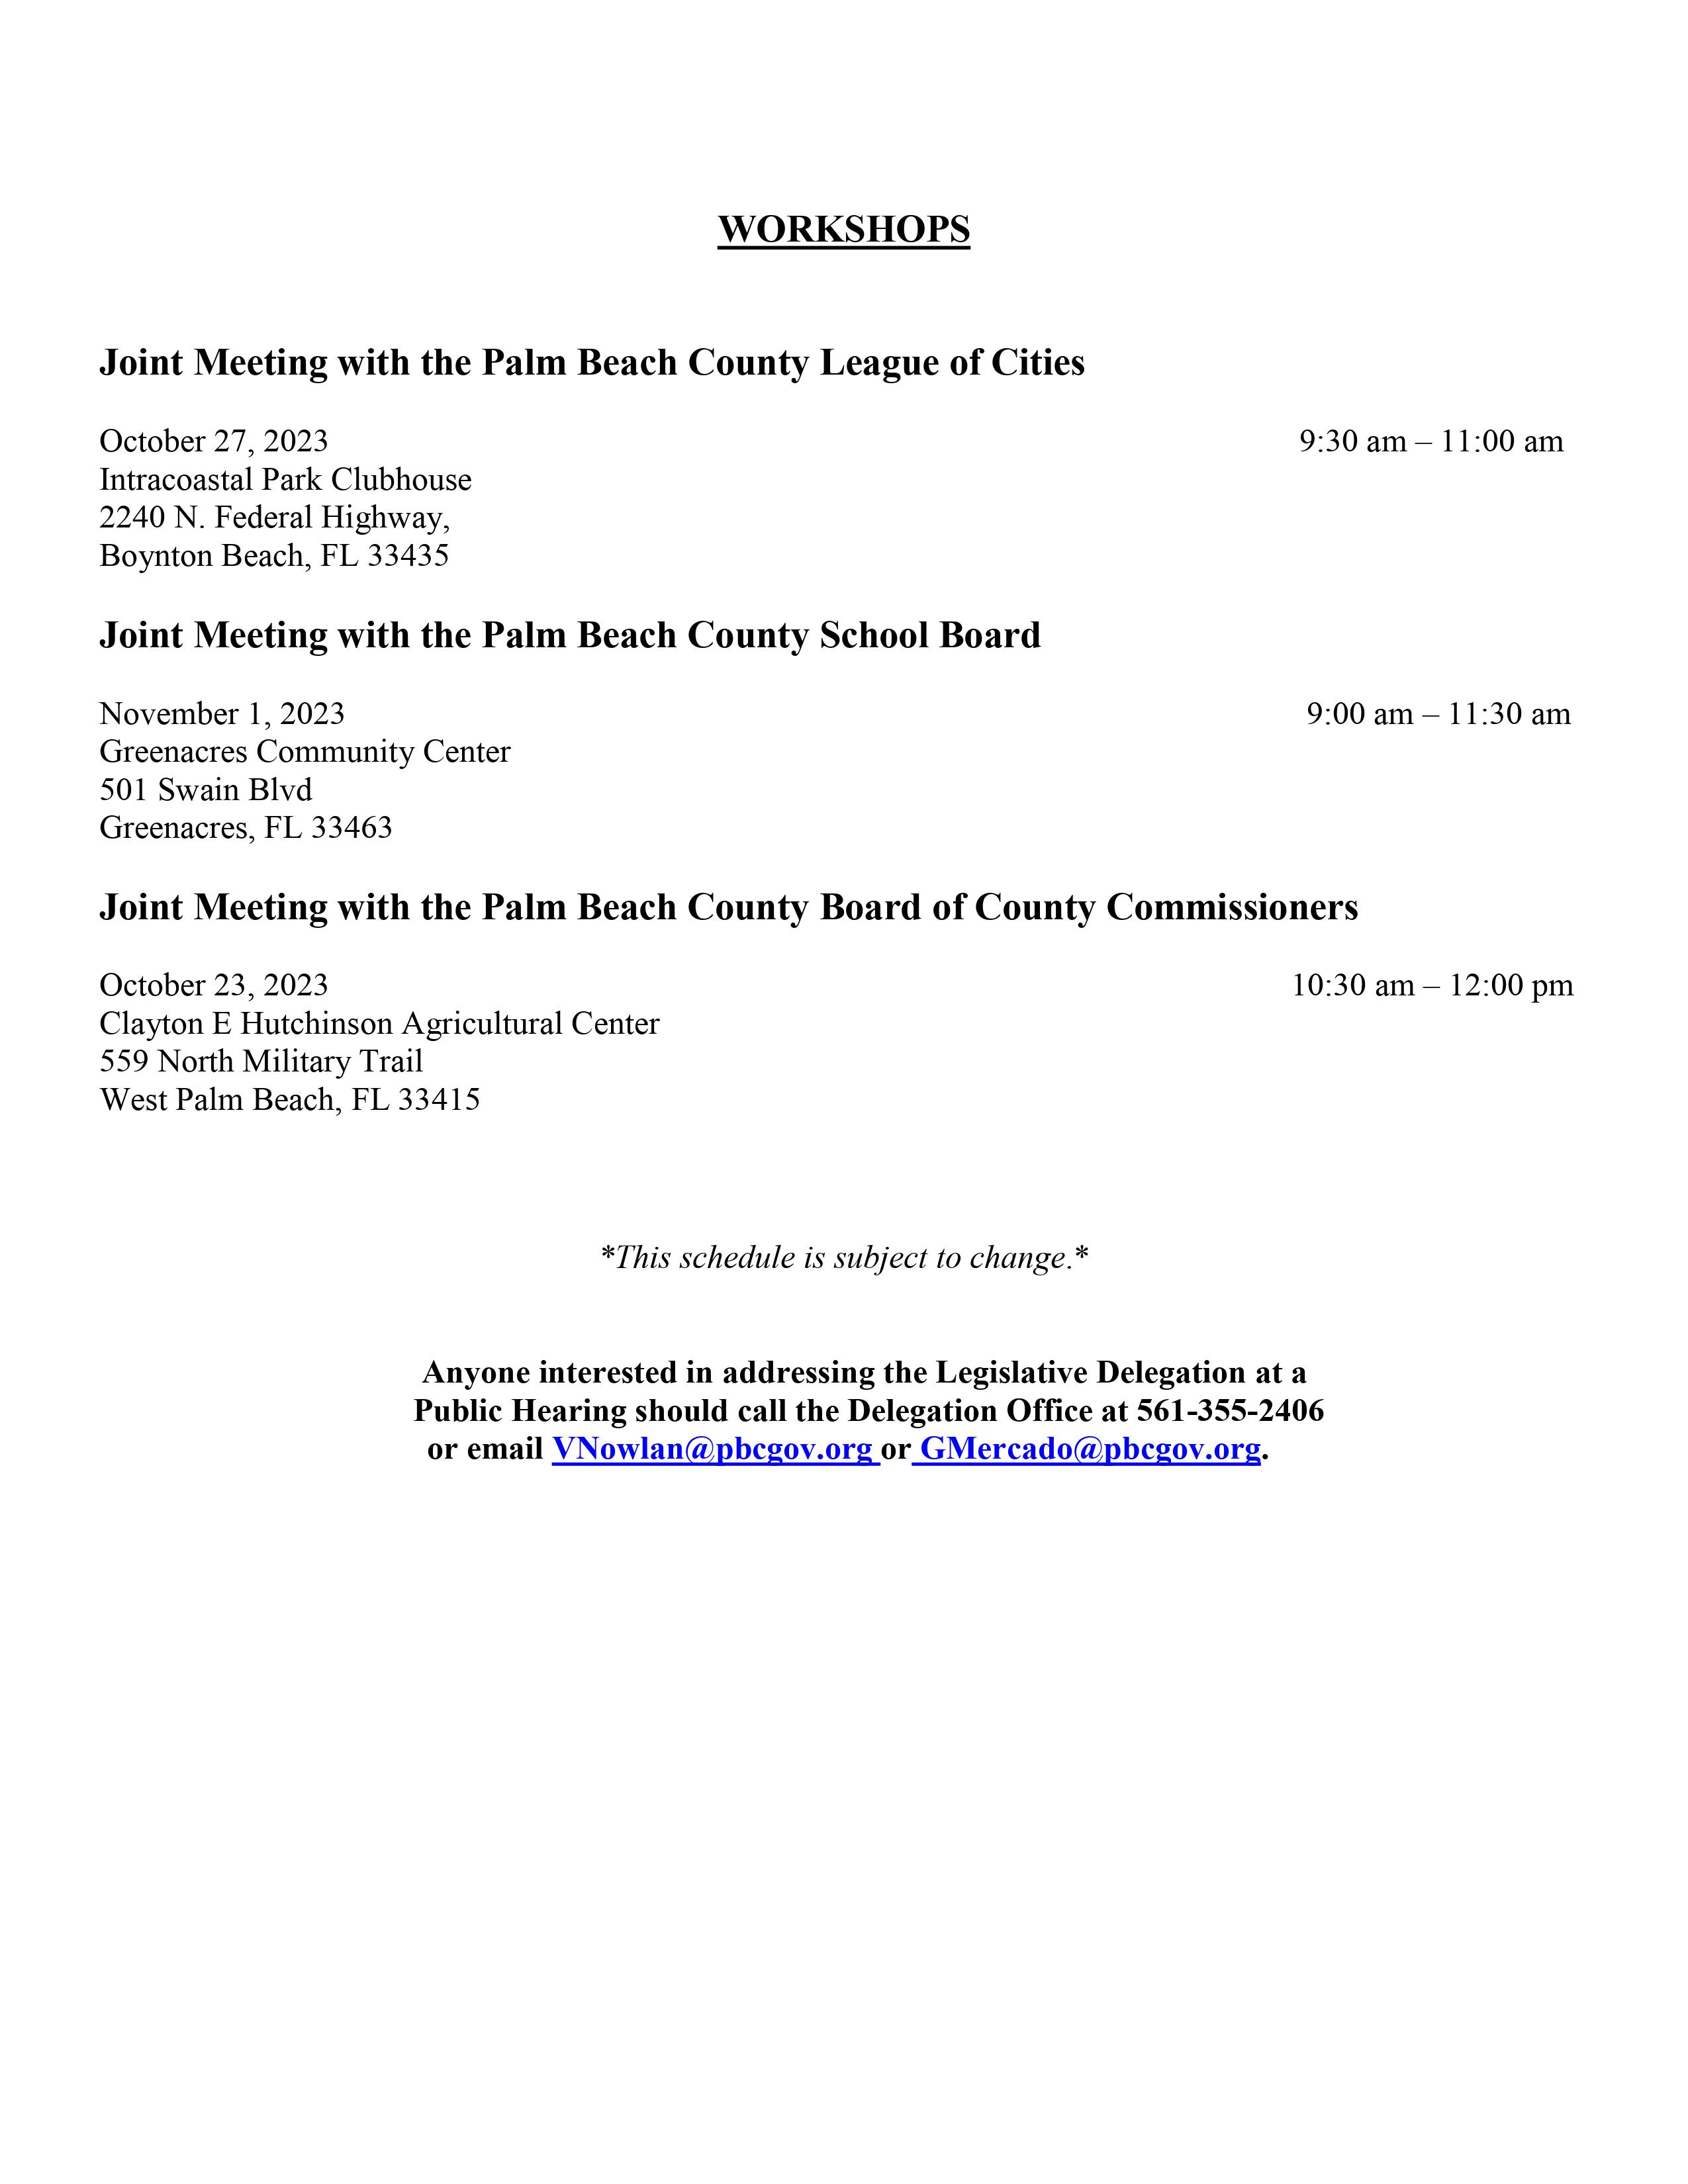 Page number 2 of the 2023-2024 Hearing and Workshop Schedule.